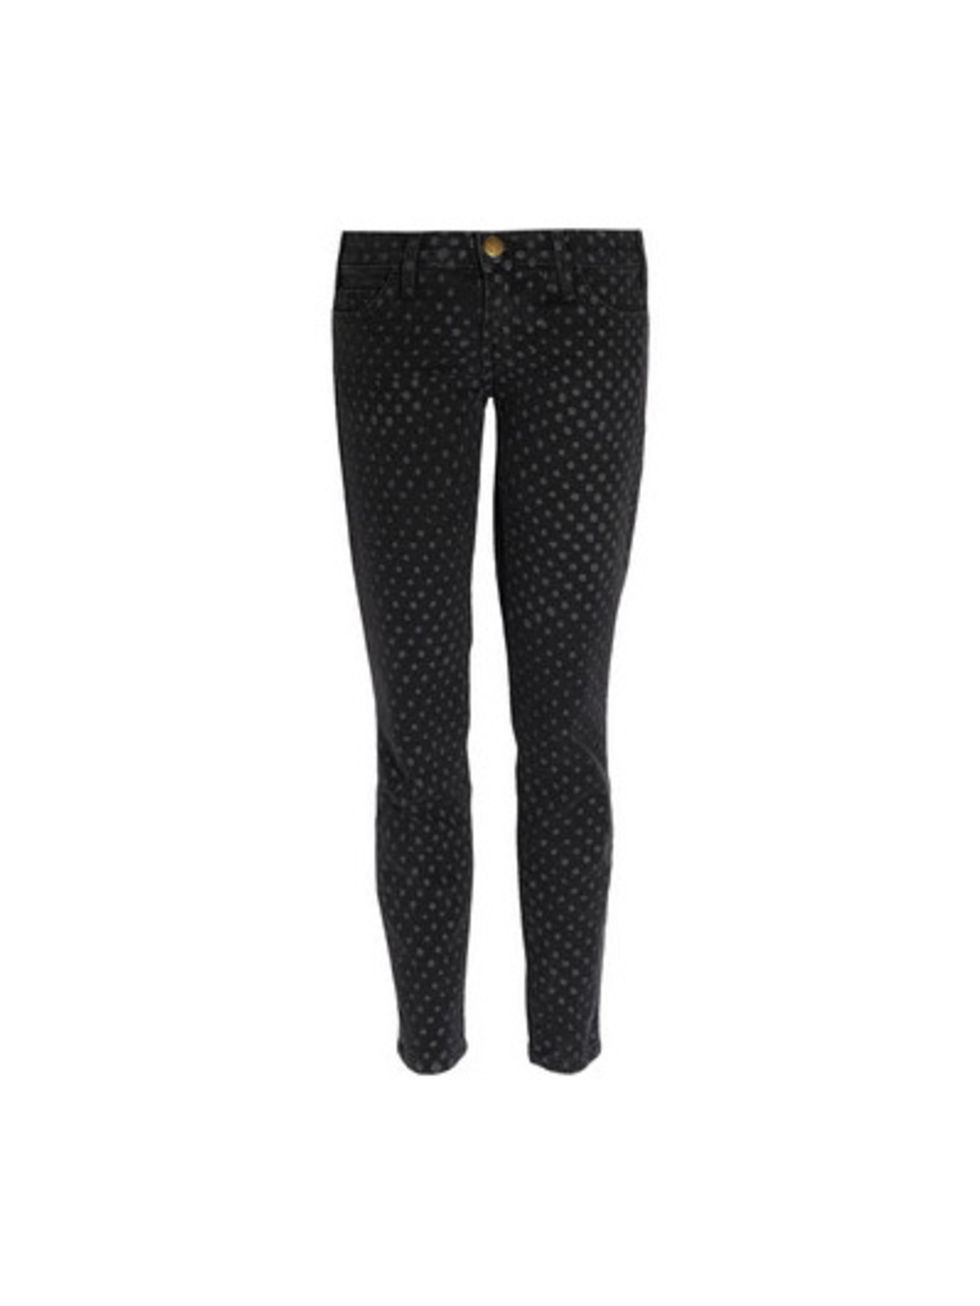 Standing, Waist, Style, Pattern, Tights, Black, Black-and-white, Active pants, Thigh, Leggings, 